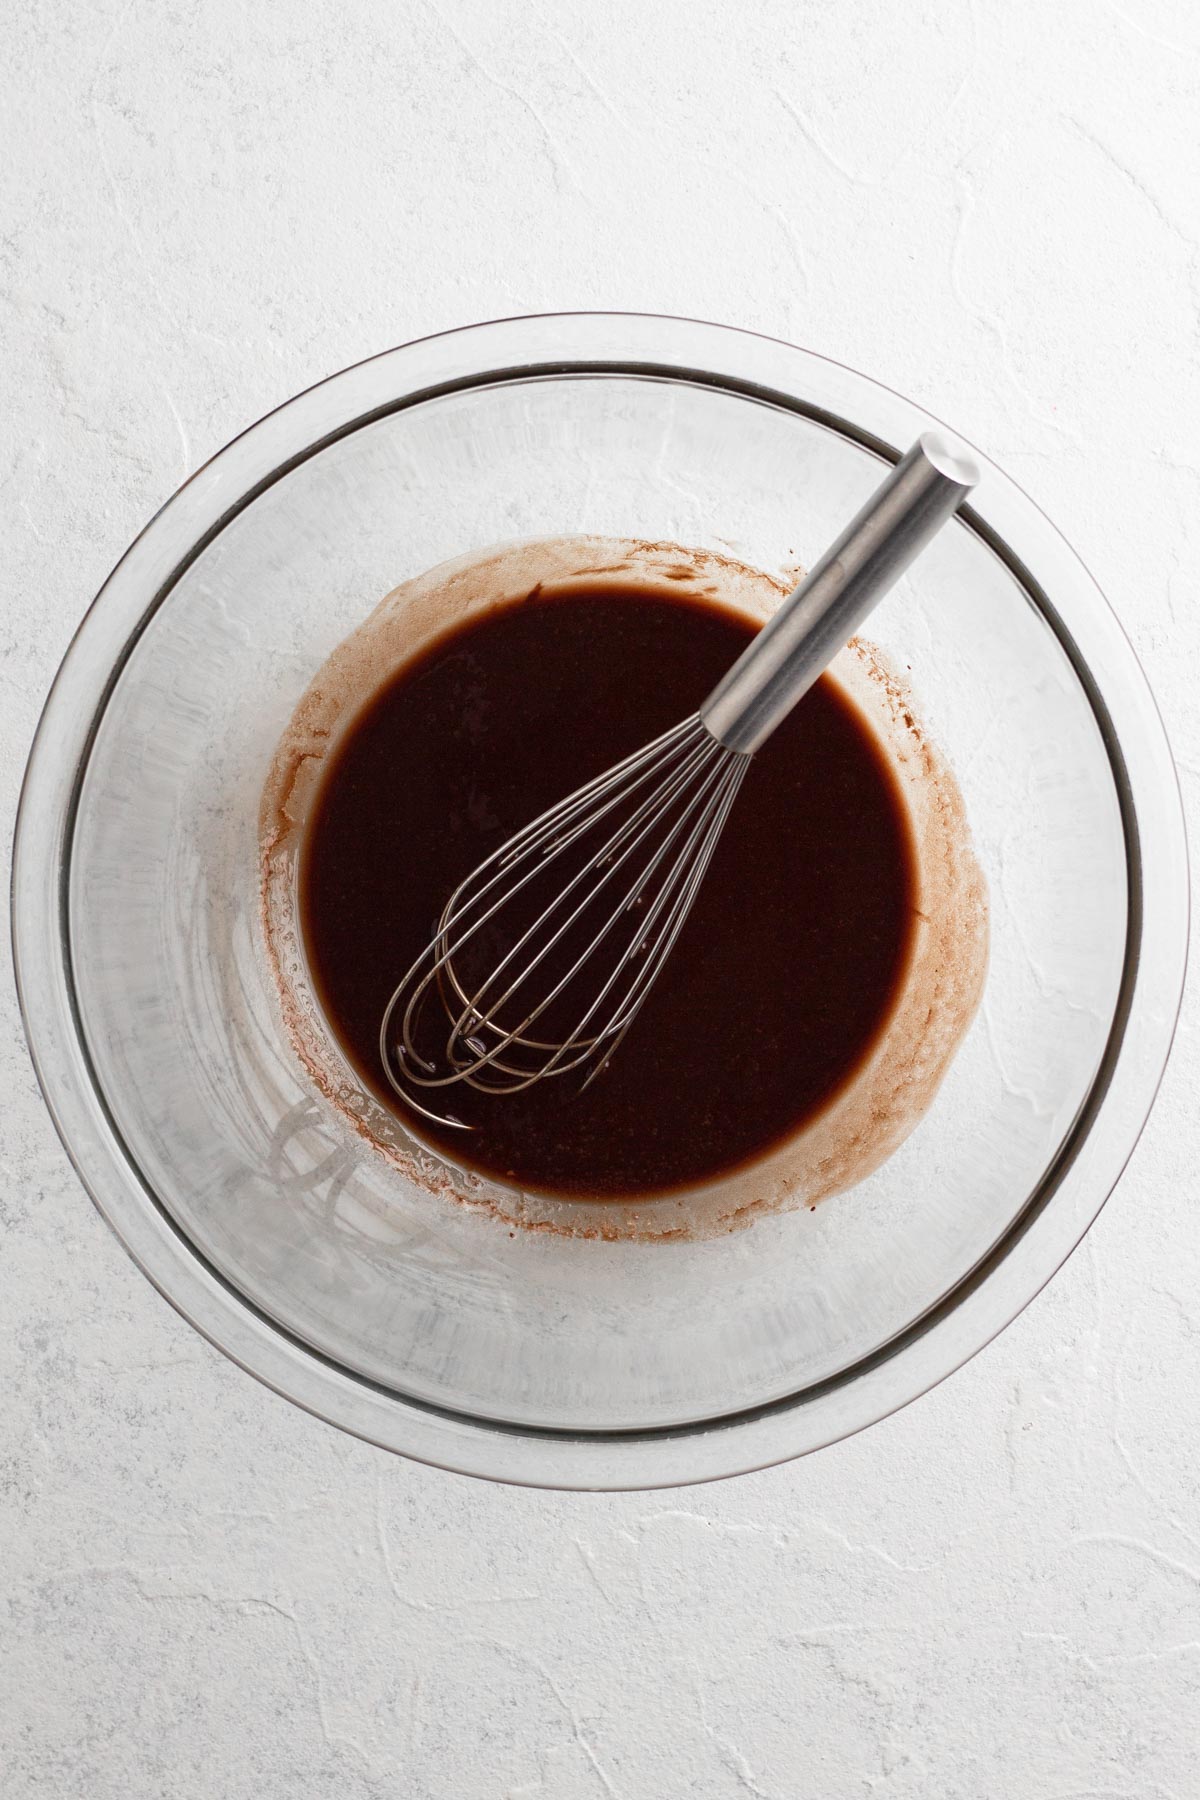 Melted butter and chocolate in a glass mixing bowl with a metal whisk.